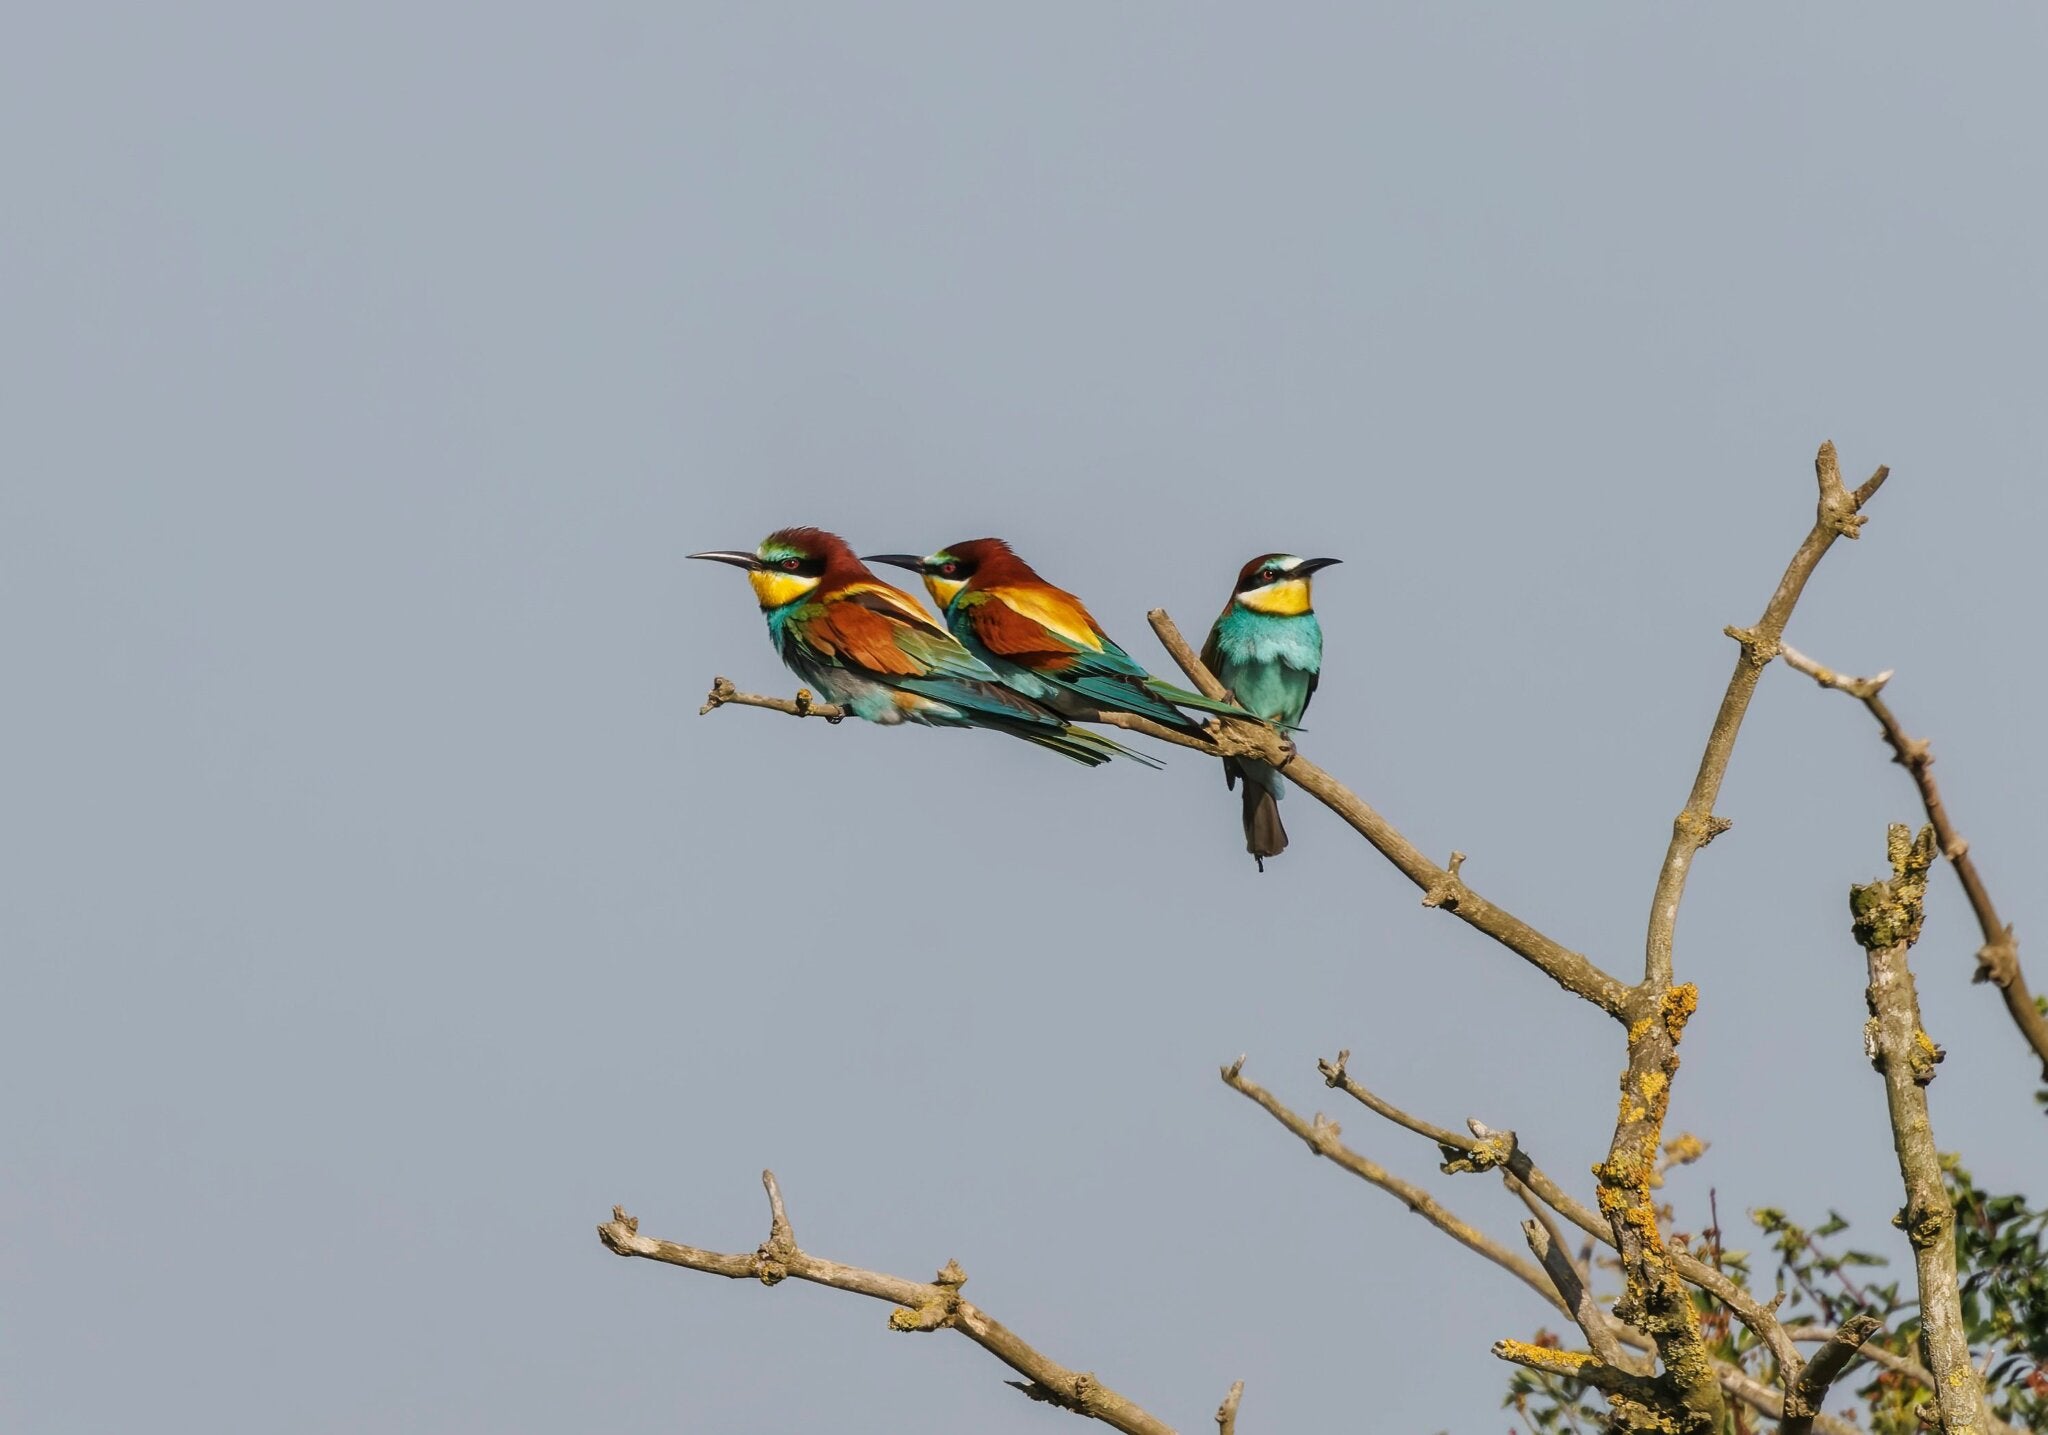 The brightly coloured birds are rare visitors from southern Europe and northern Africa